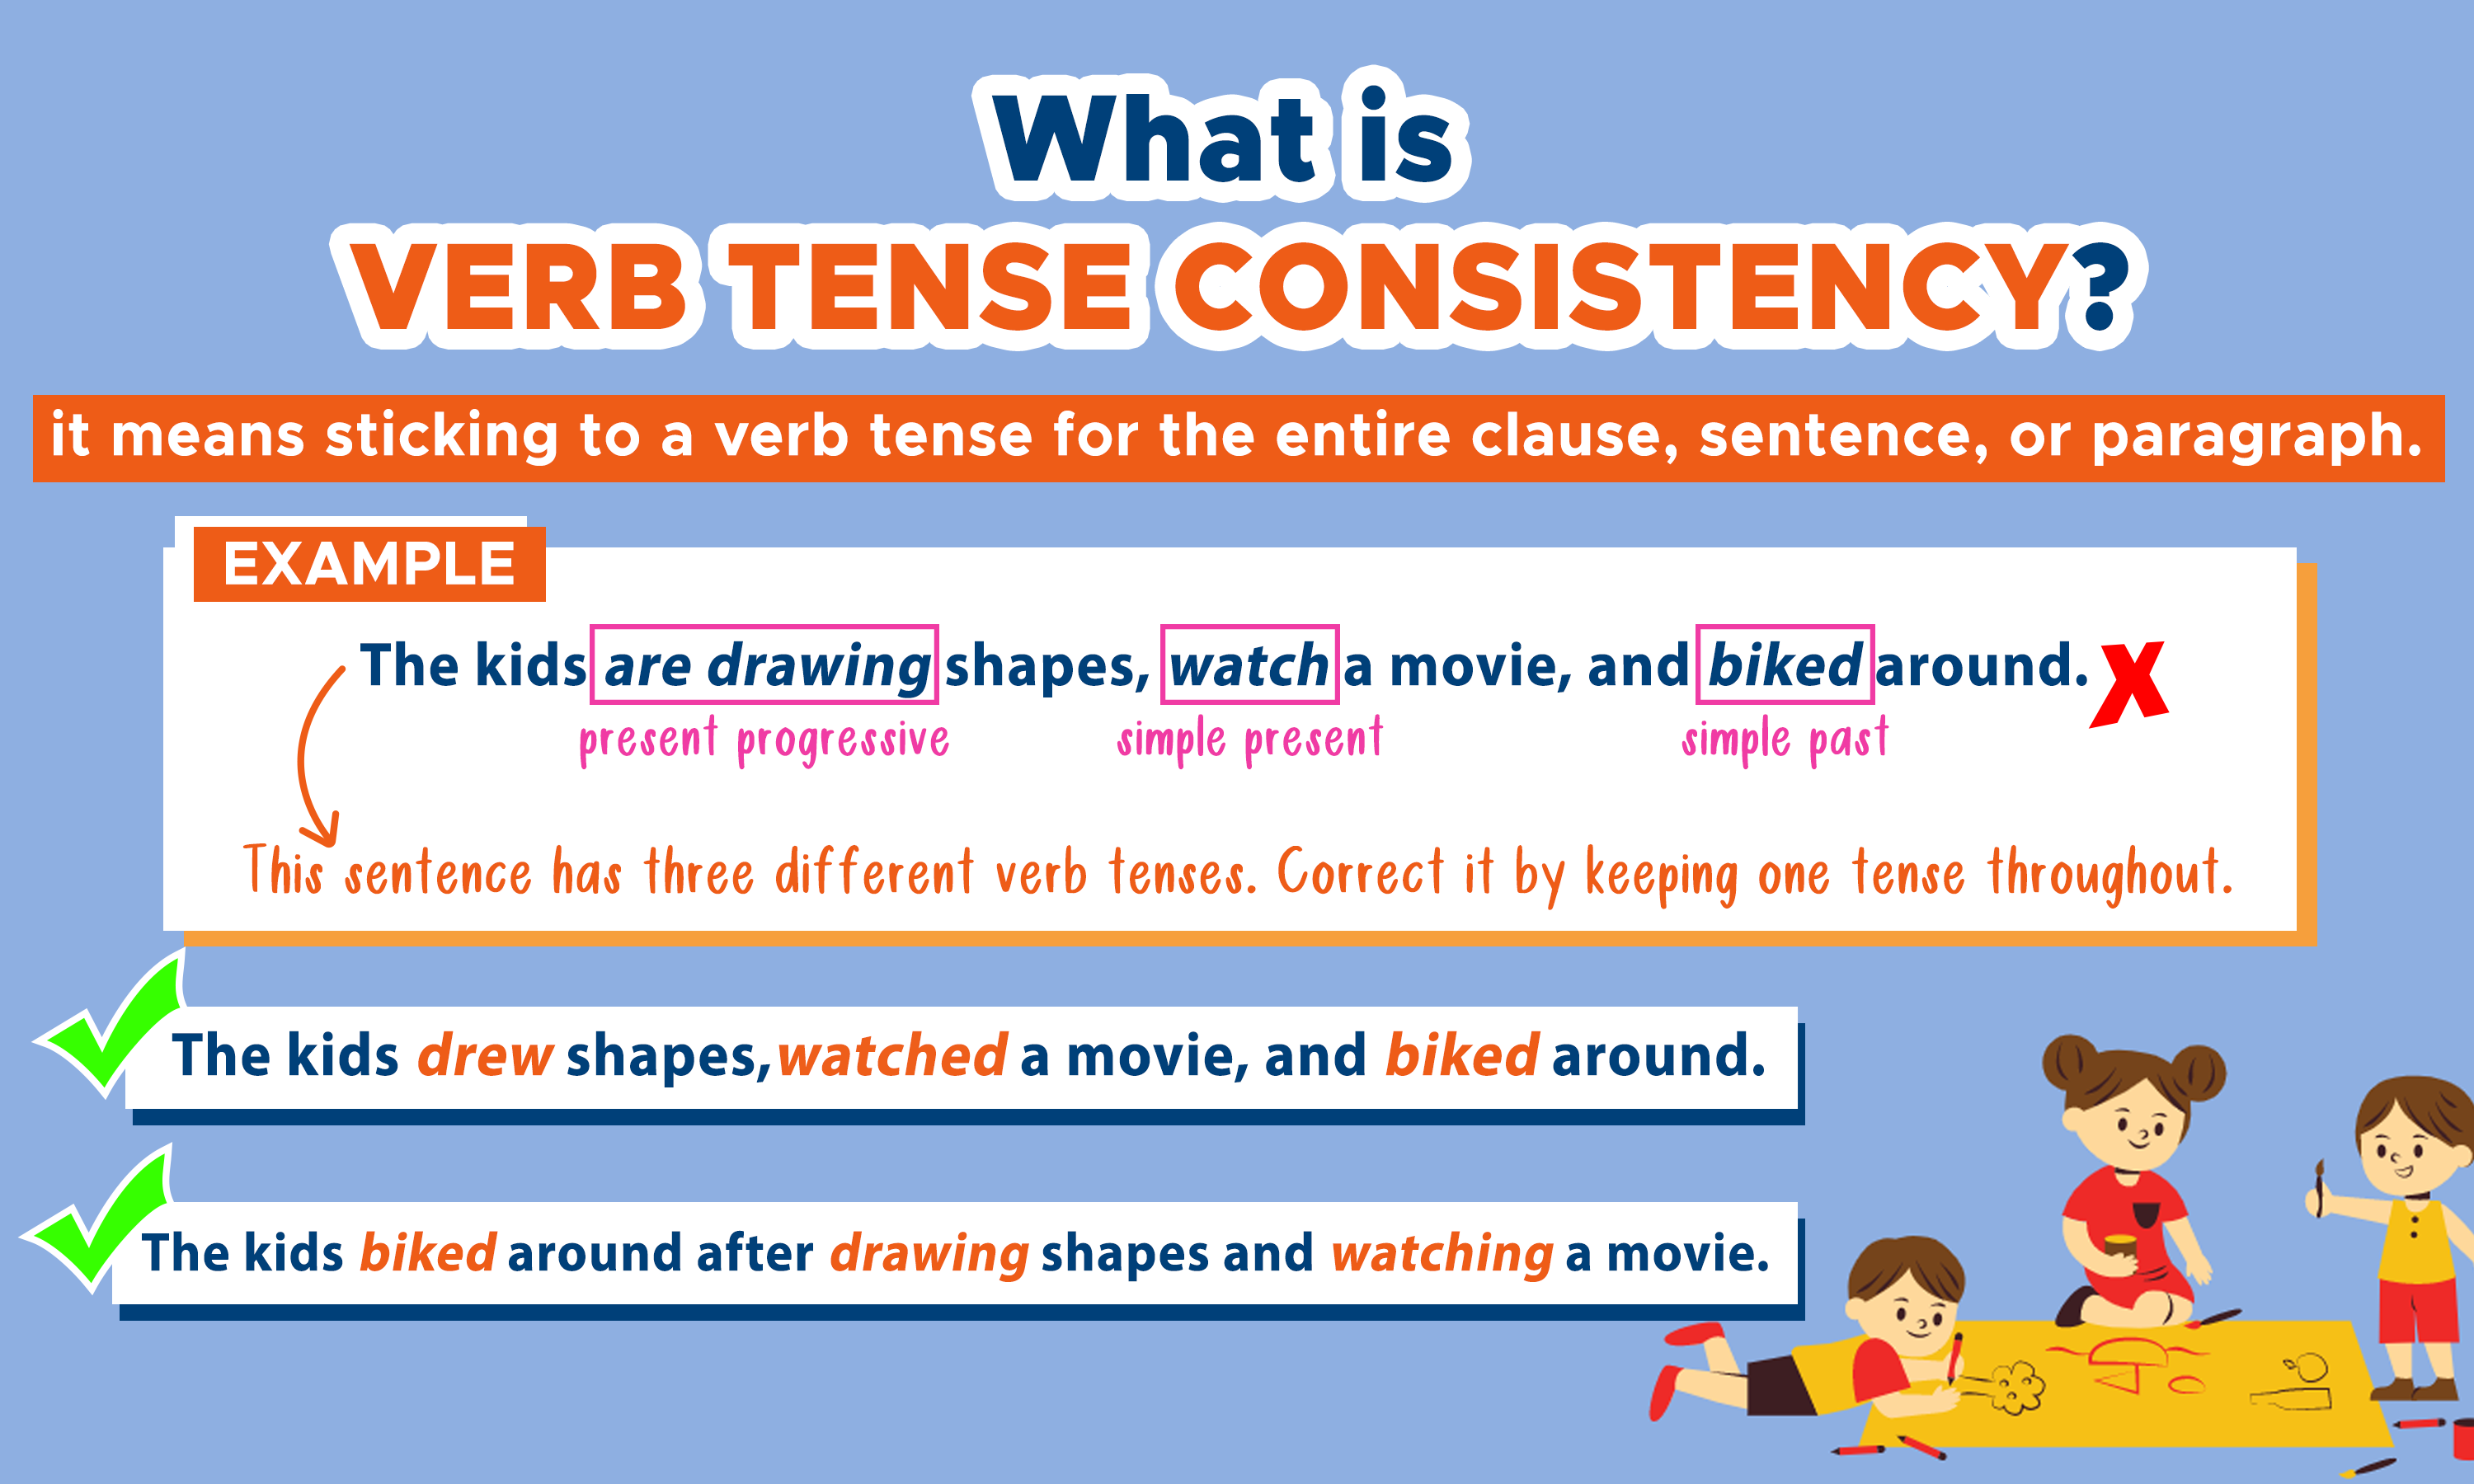 verb-tense-consistency-maintain-or-change-curvebreakers